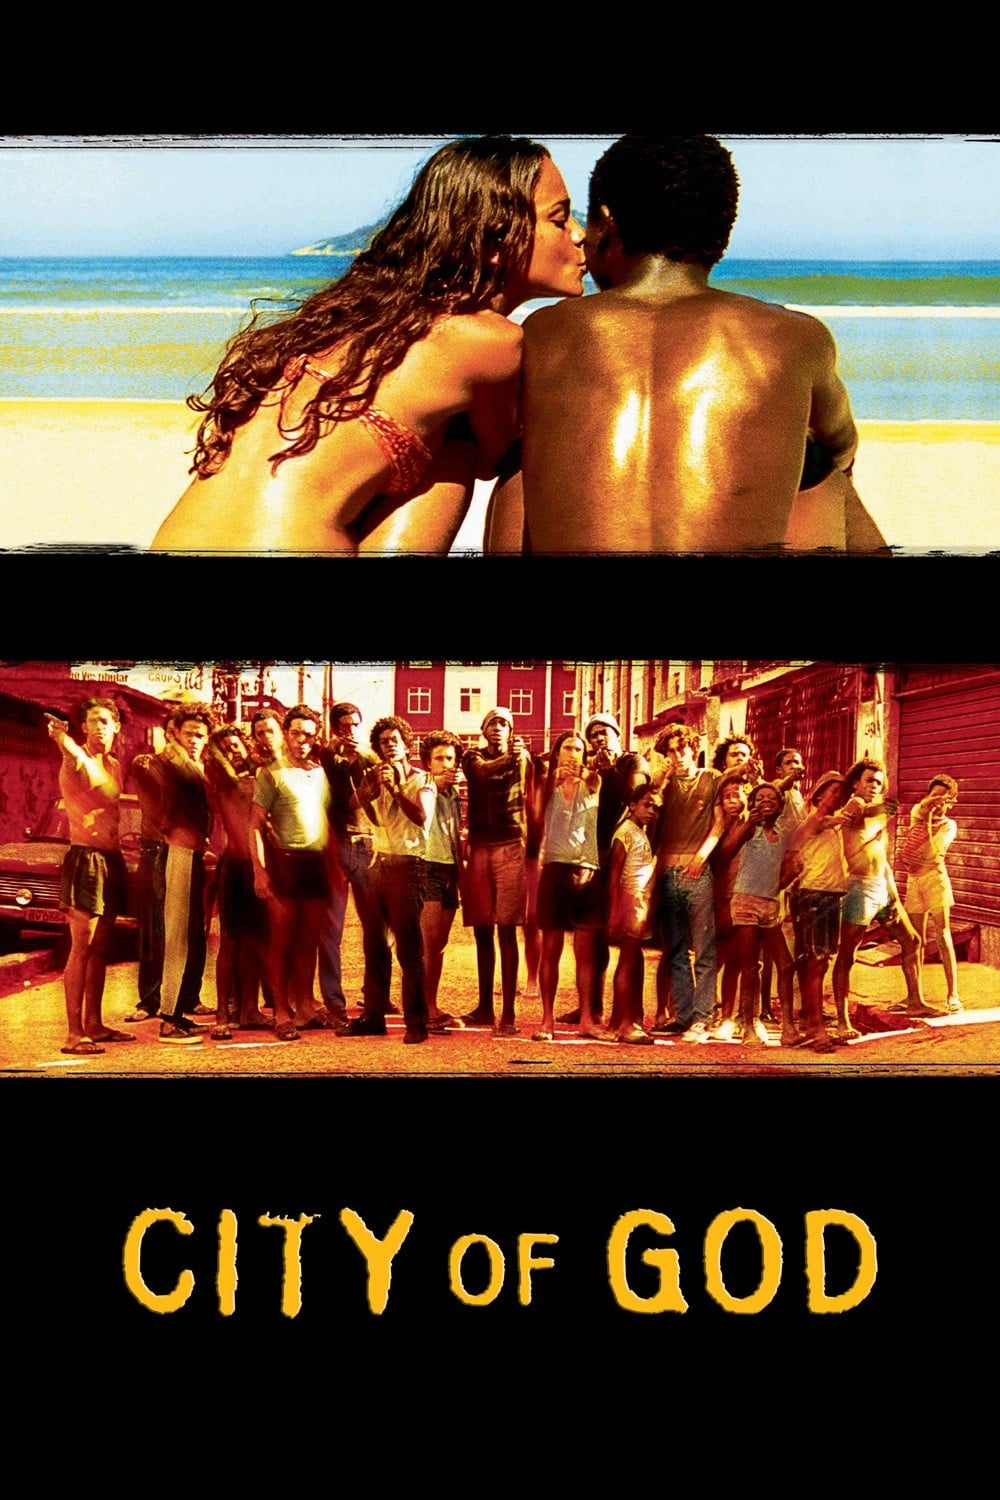 Poster for the movie "City of God"